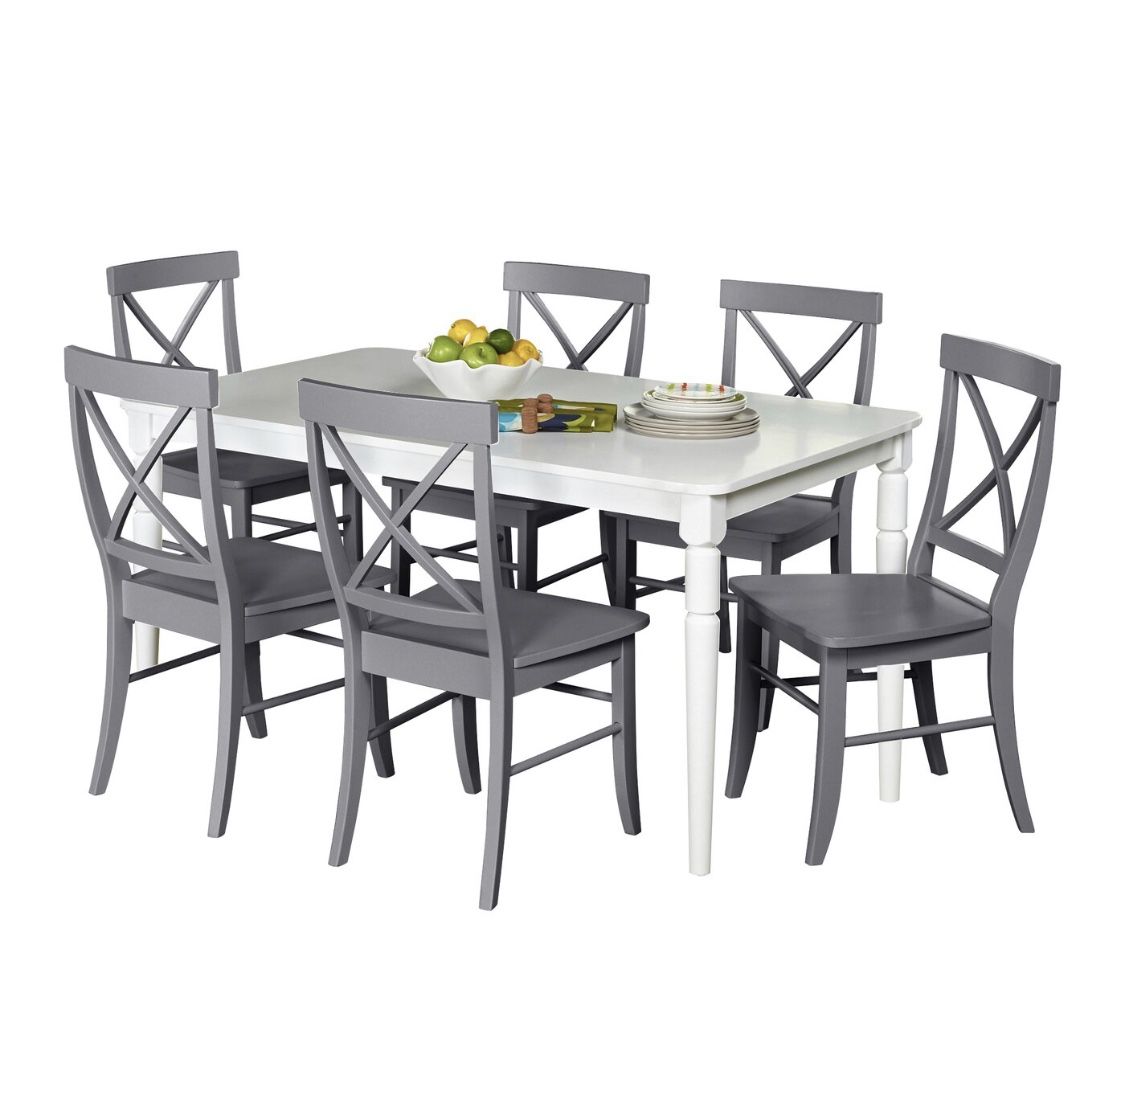 MOVING SALE!!! Like-New Brookwood Solid Wood 7-piece Dining Set!